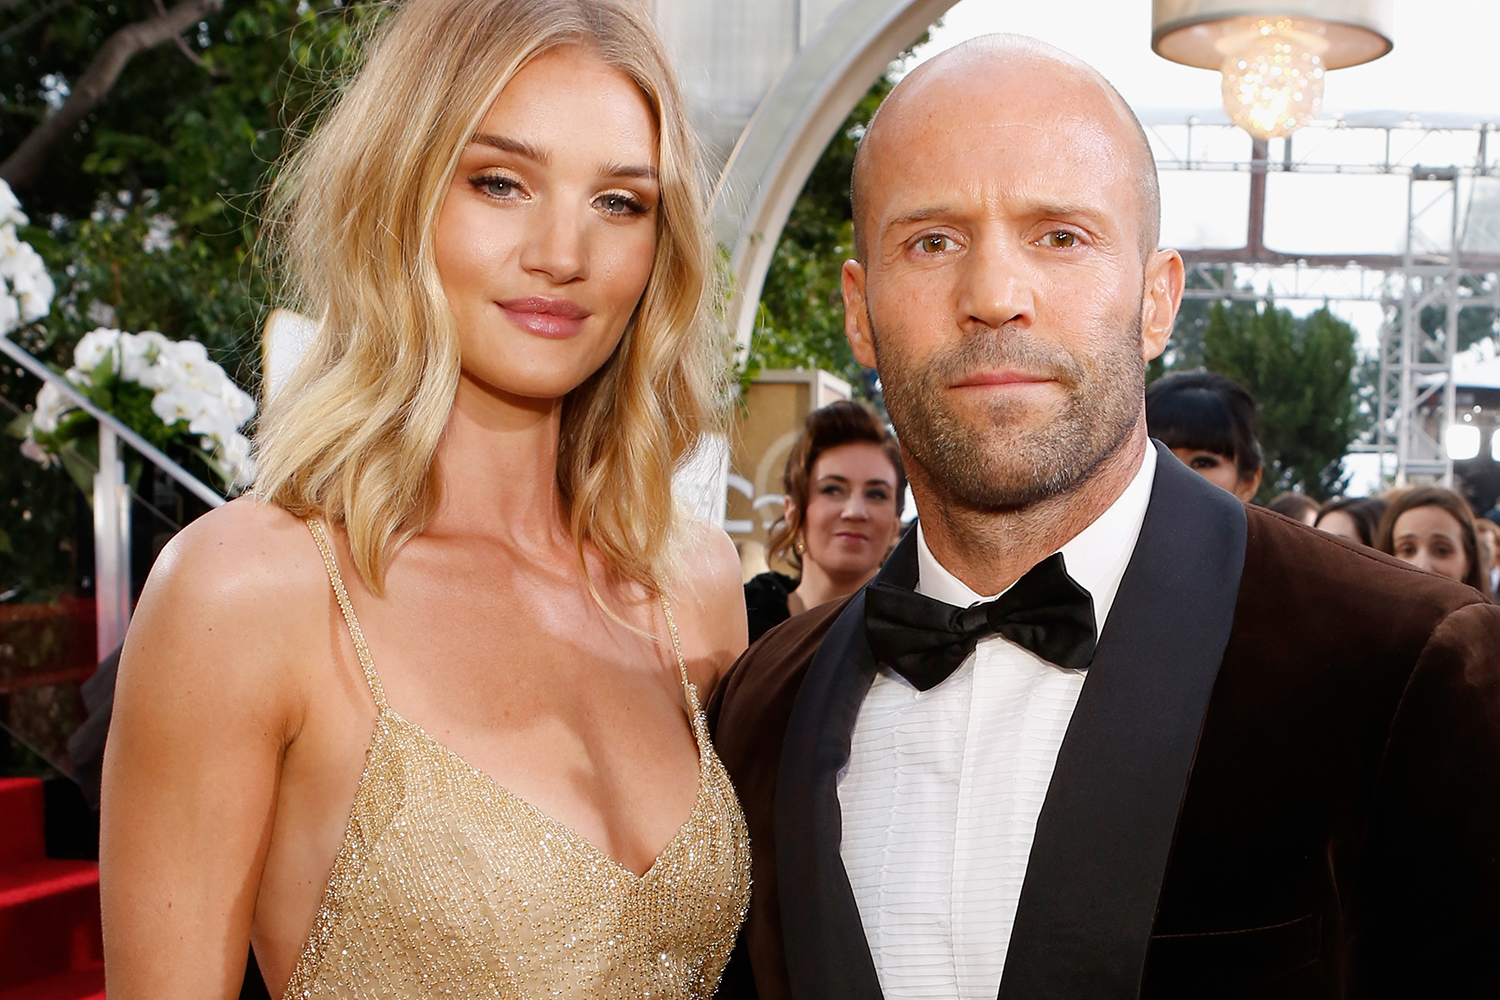 Did Rosie Huntington-Whiteley and Jason Statham Get Married In Secret?